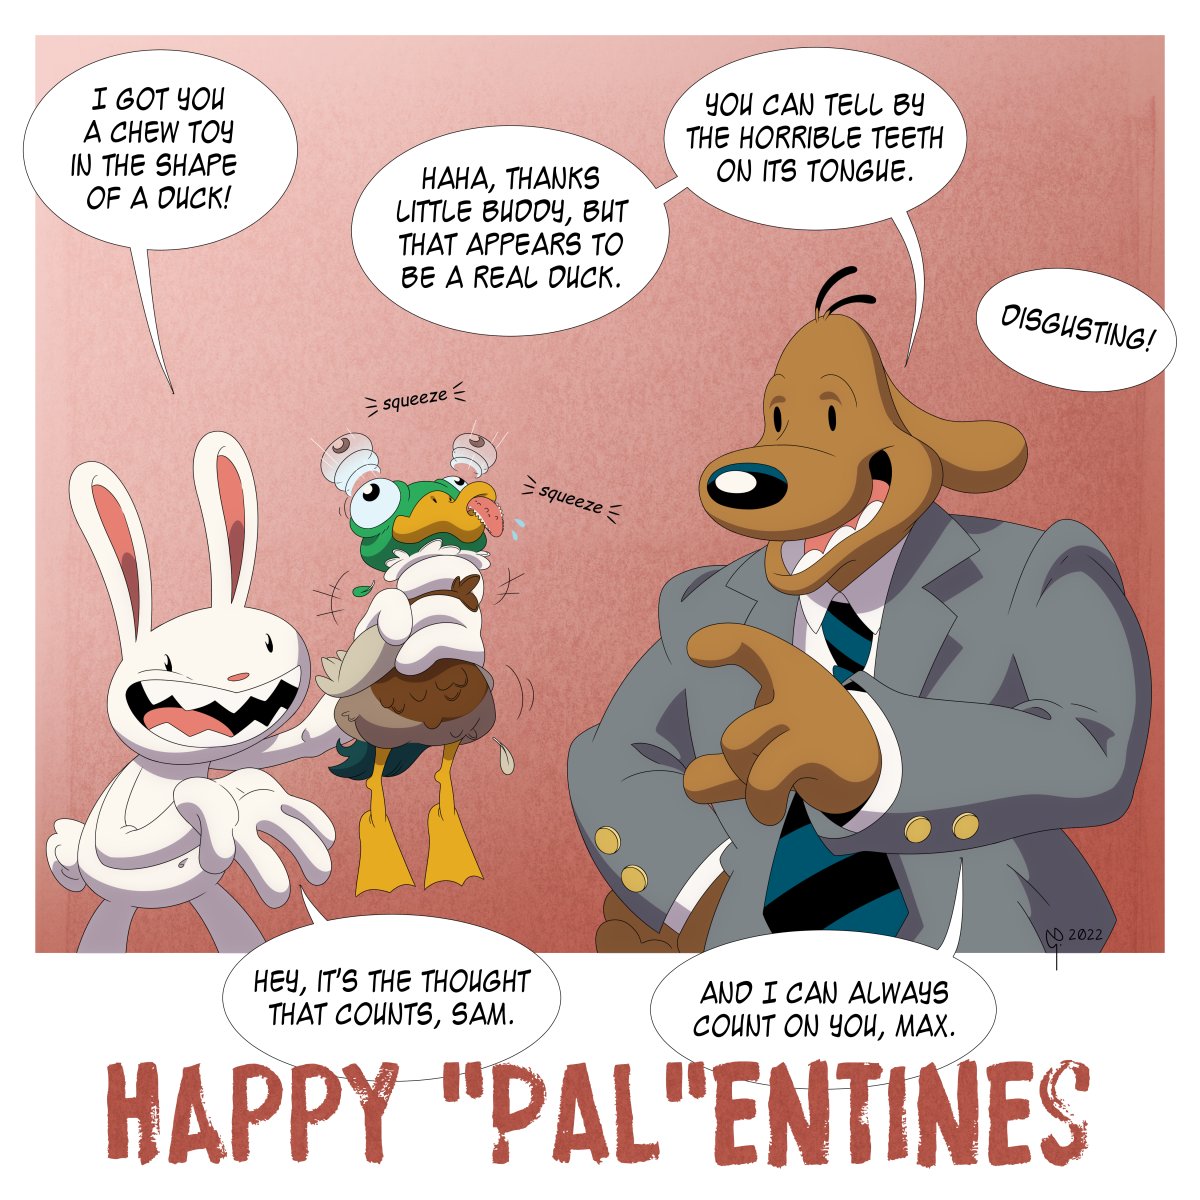 Happy Palentines Day! 

It's a good day to celebrate the friends you love.

#SamAndMax #PalentinesDay